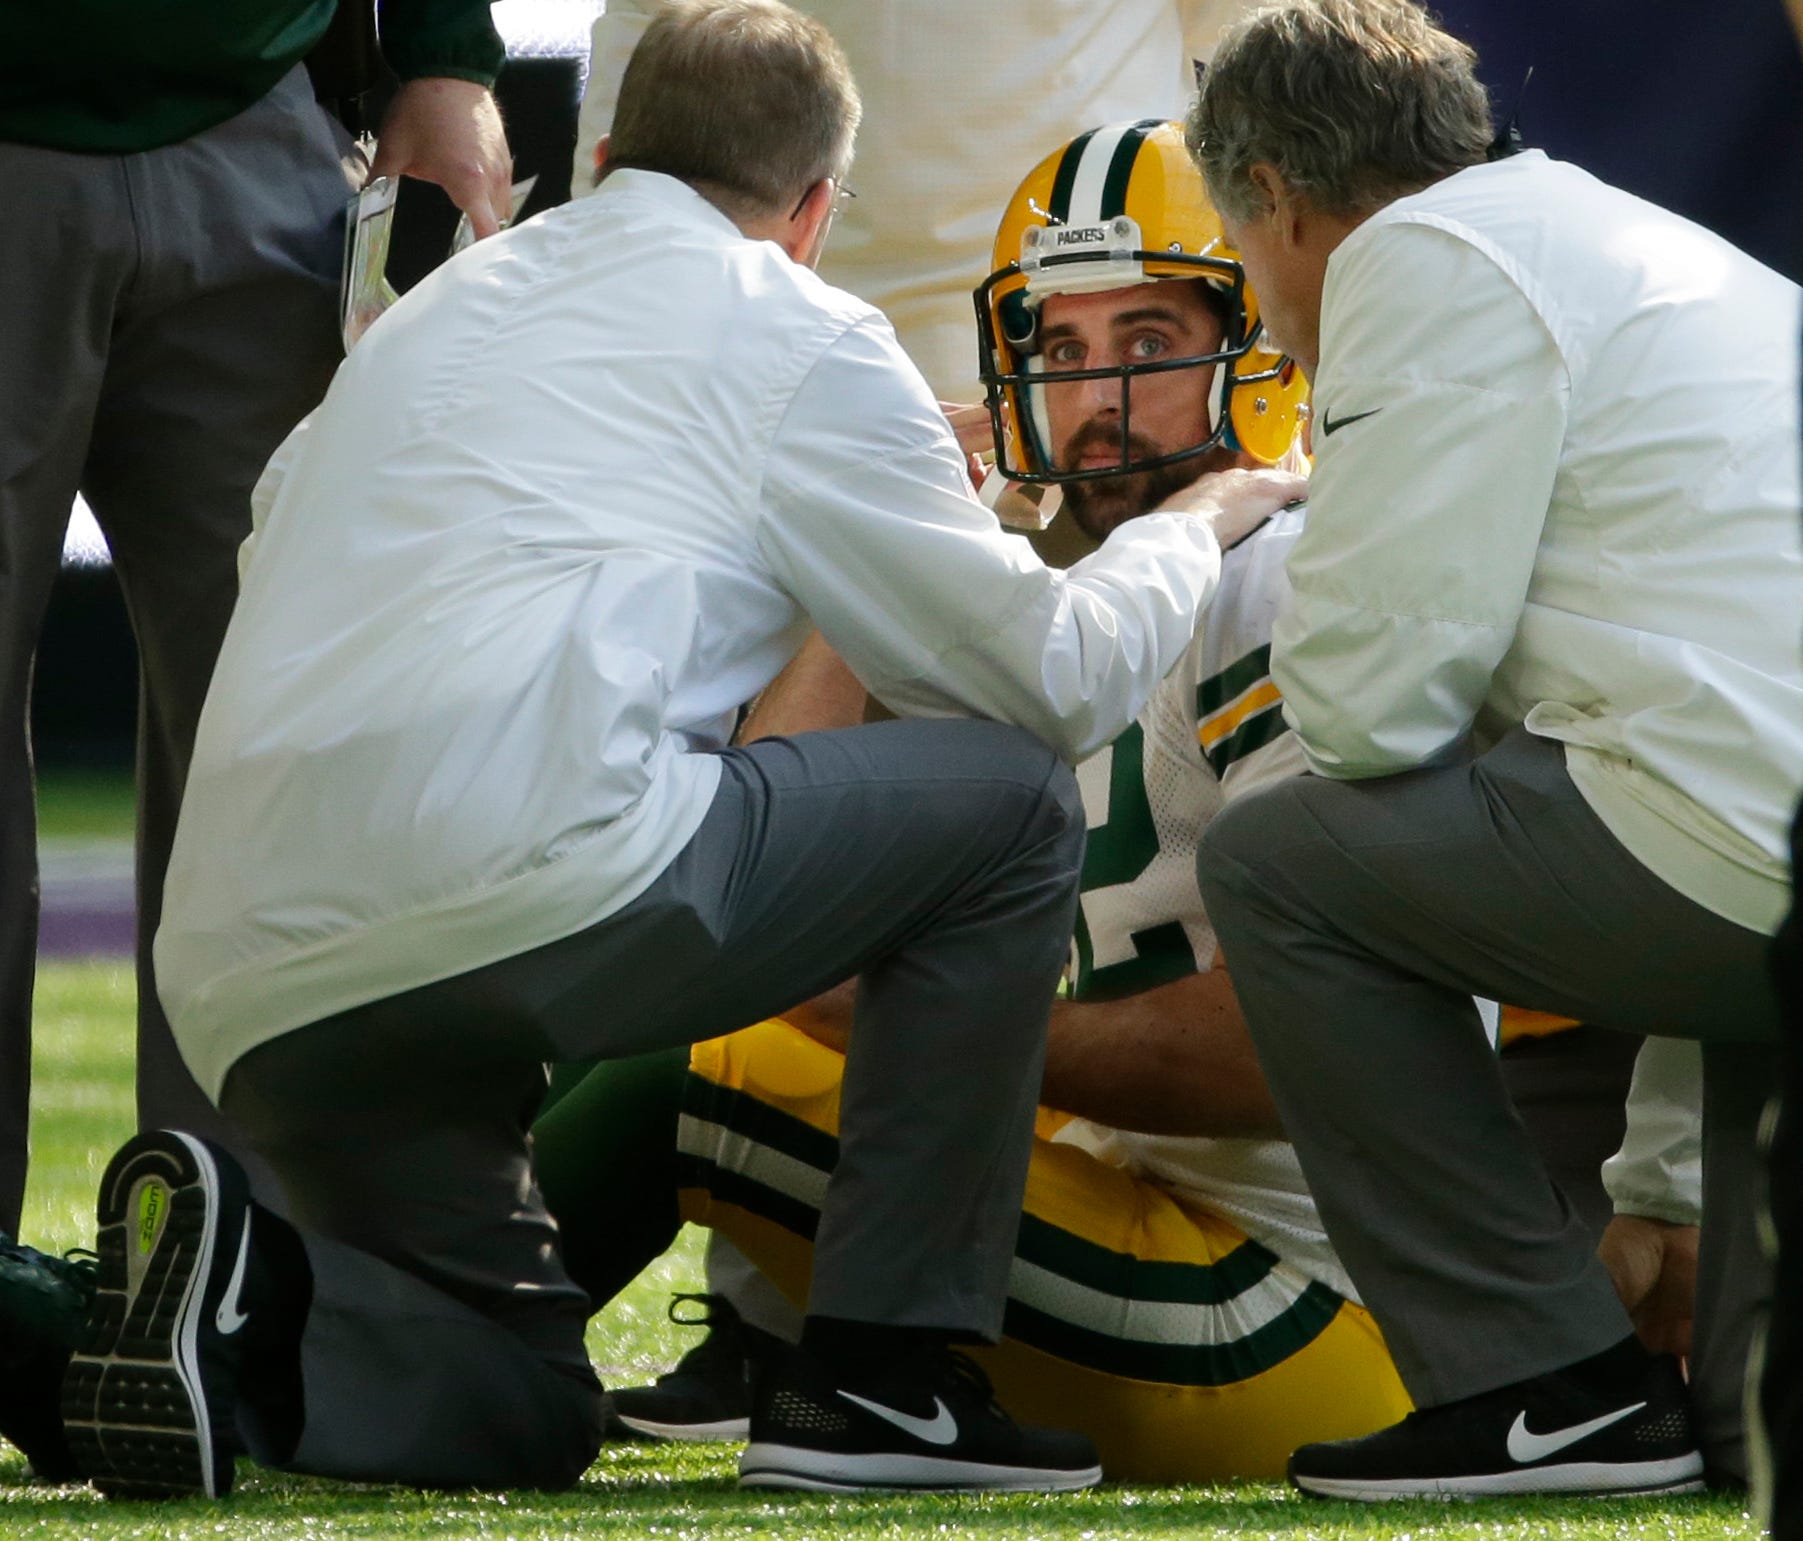 Green Bay Packers quarterback Aaron Rodgers (12) is tended to after being injured during the first quarter of their game against the Minnesota Vikings Sunday, October 5, 2017 at U.S. Bank Stadium in Minneapolis, Minn.